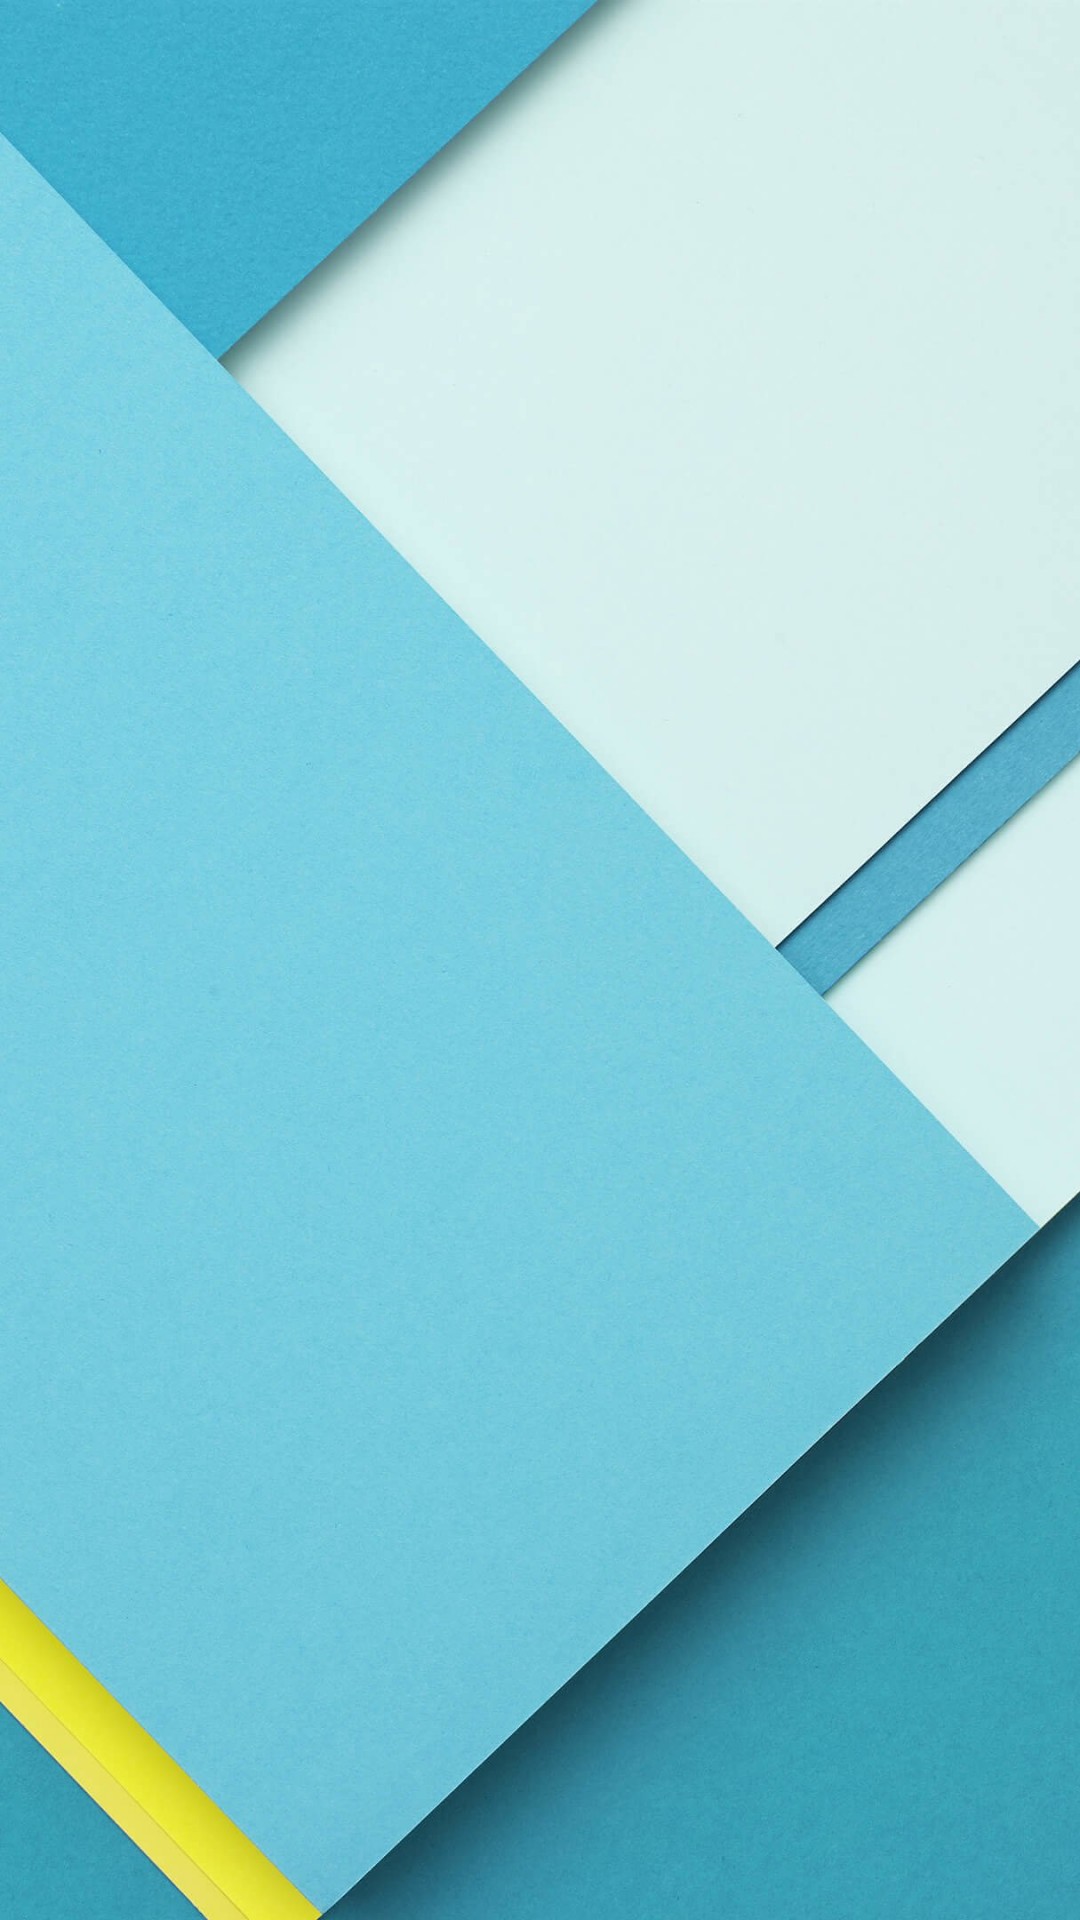 Google Material Design Wallpaper for SAMSUNG Galaxy Note 3